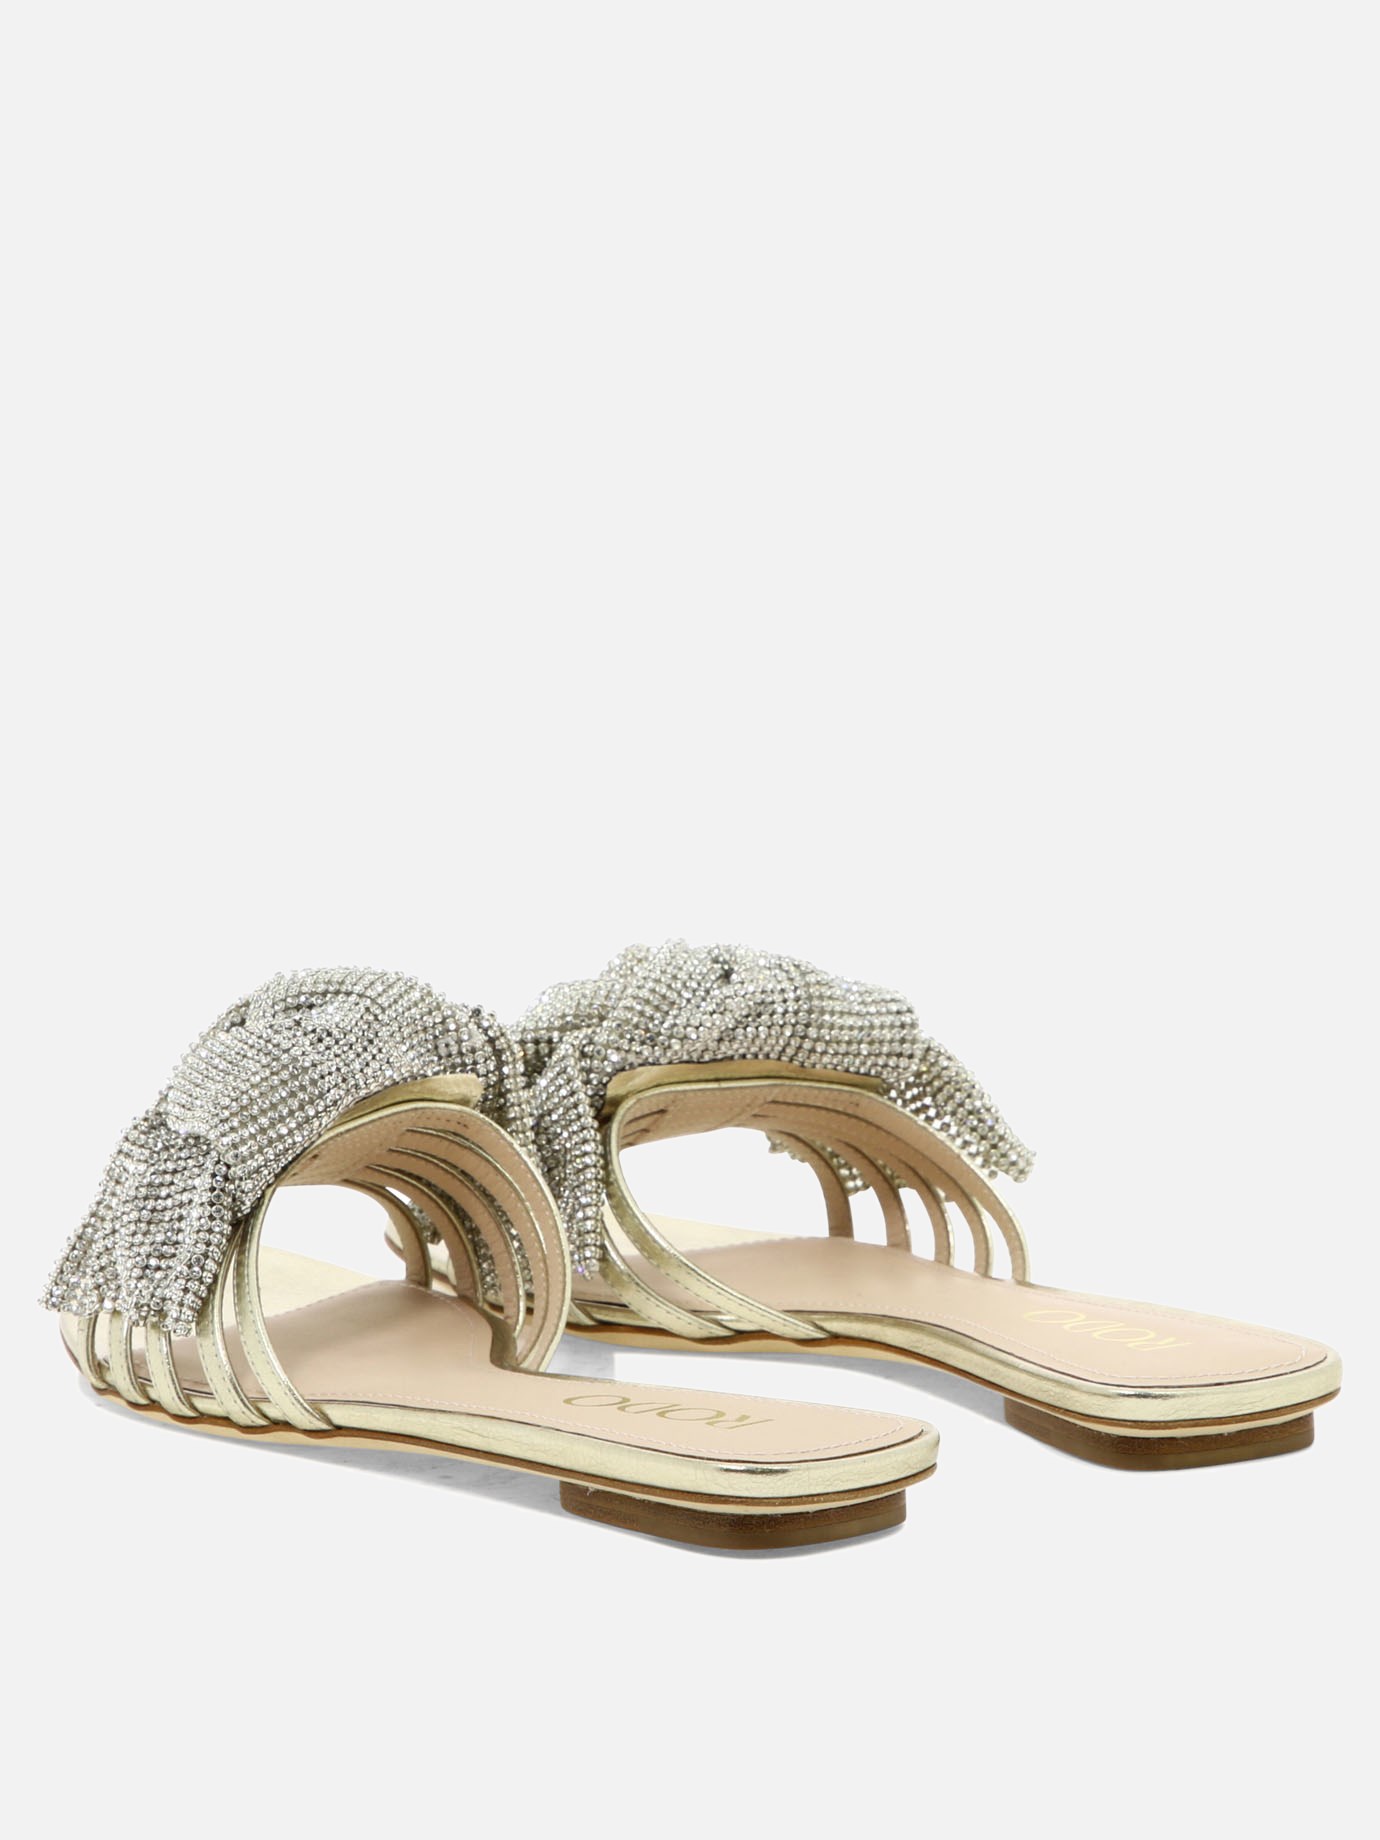  Ribbon  sandals by Rodo